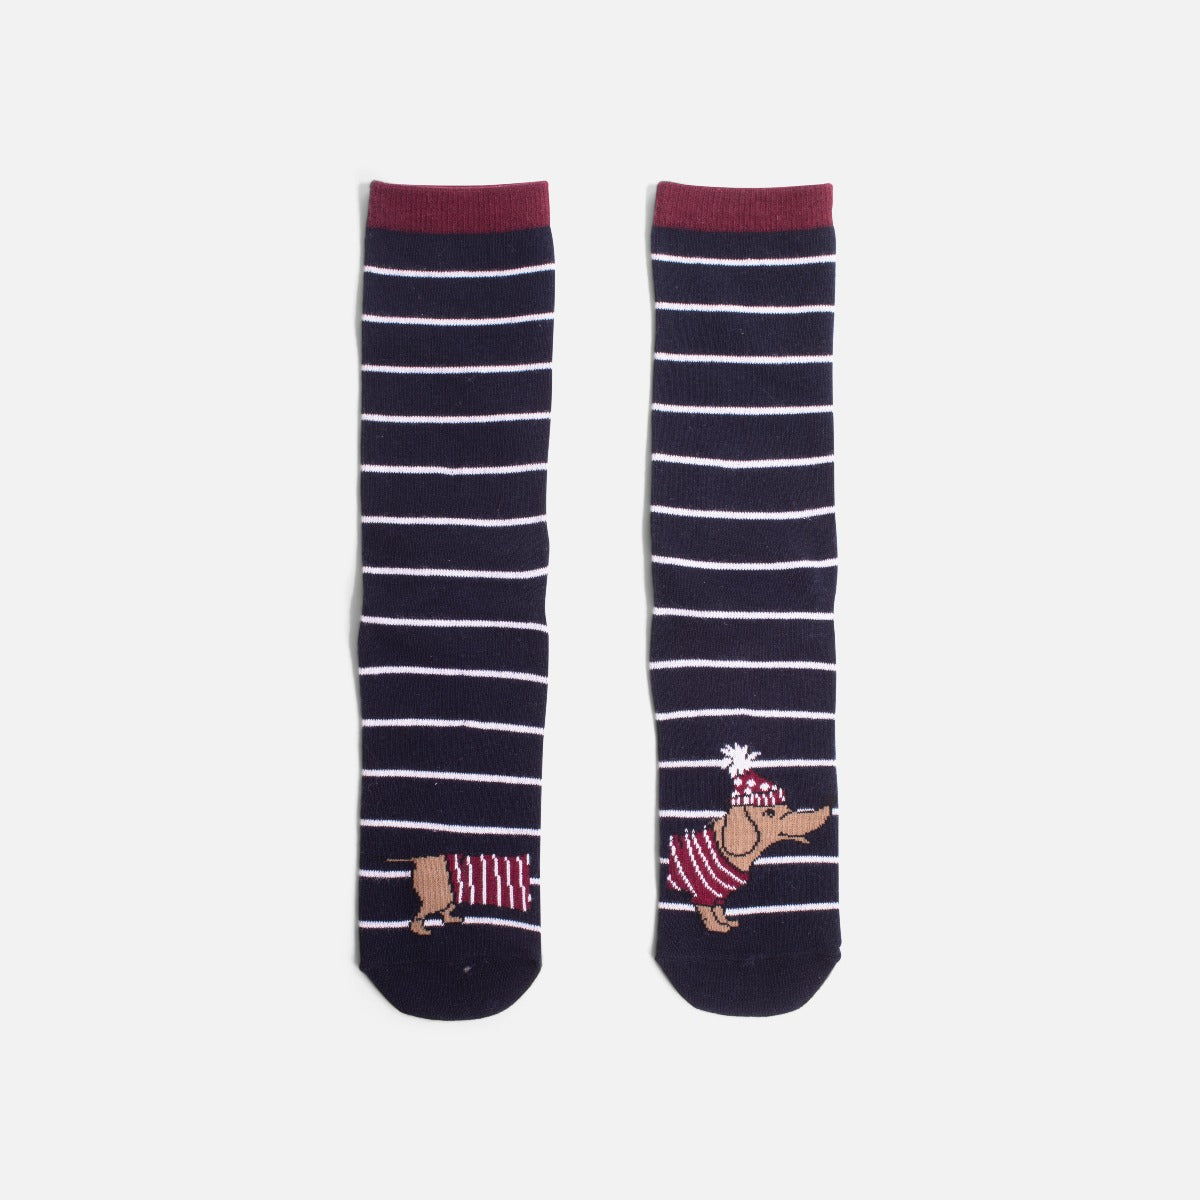 Navy blue socks with stripes and separate teckel dog   